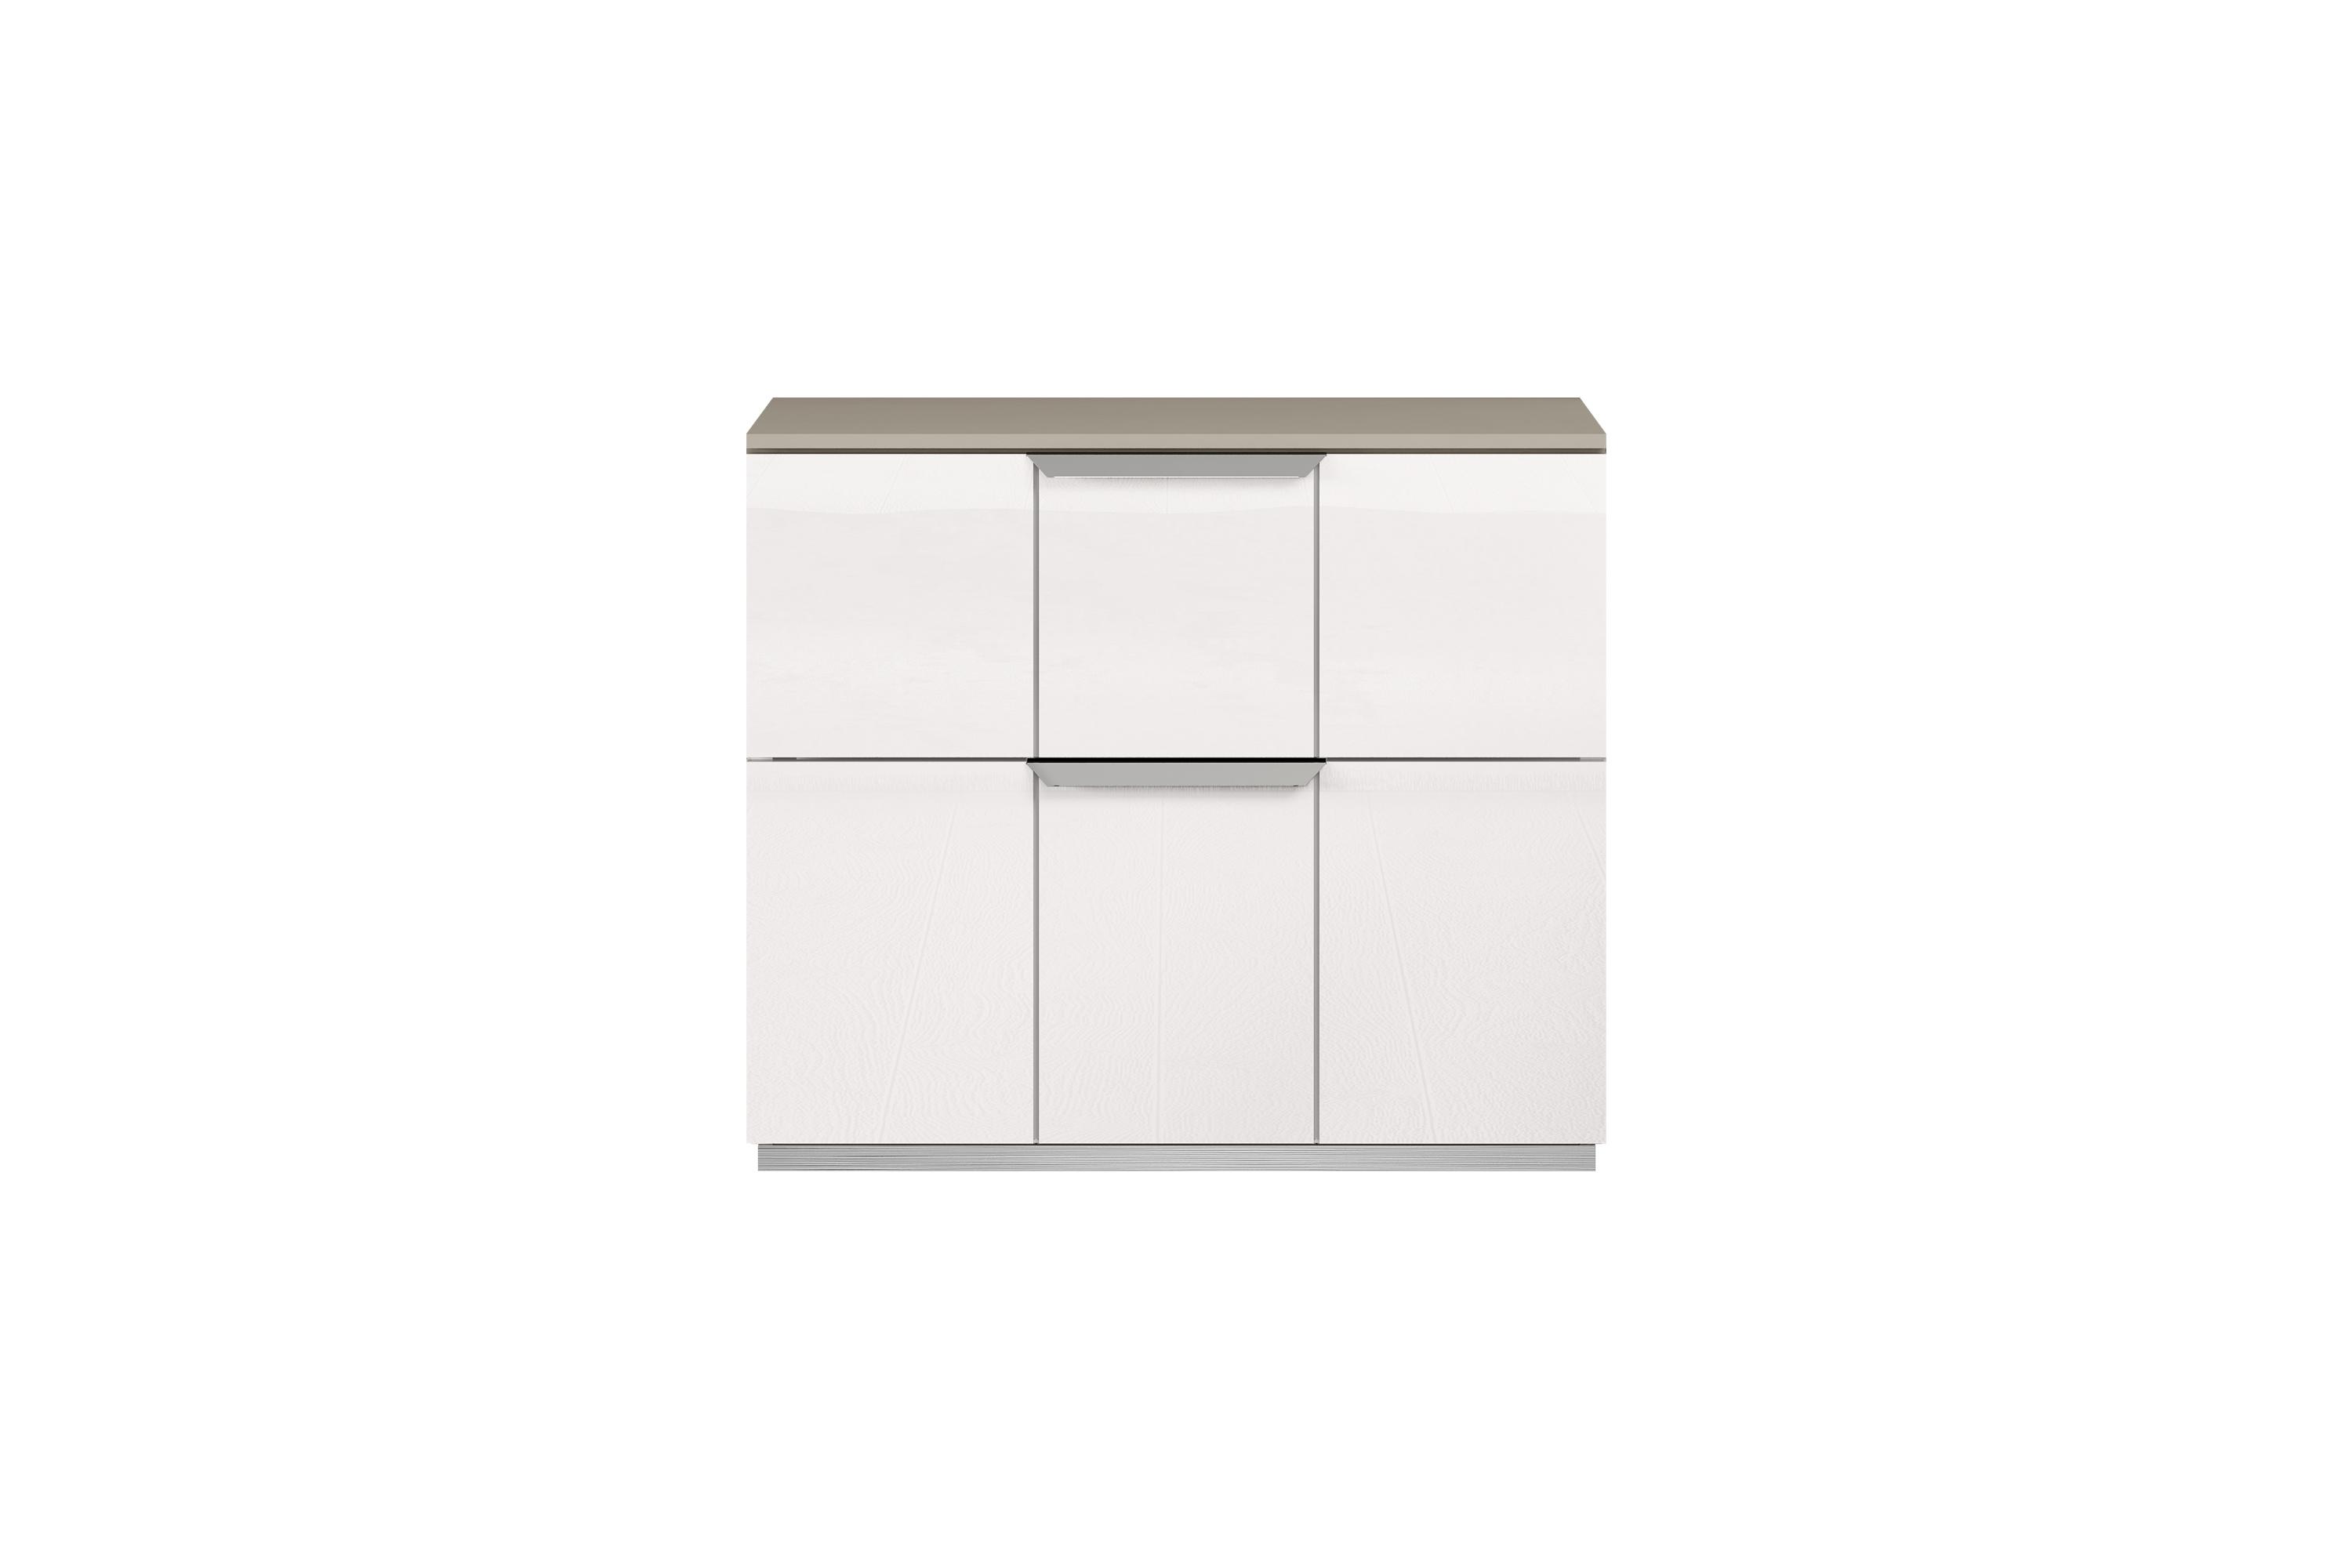 

    
Contemporary High Gloss White Solid Wood Nightstand WhiteLine NS1723-WHT Daisy
